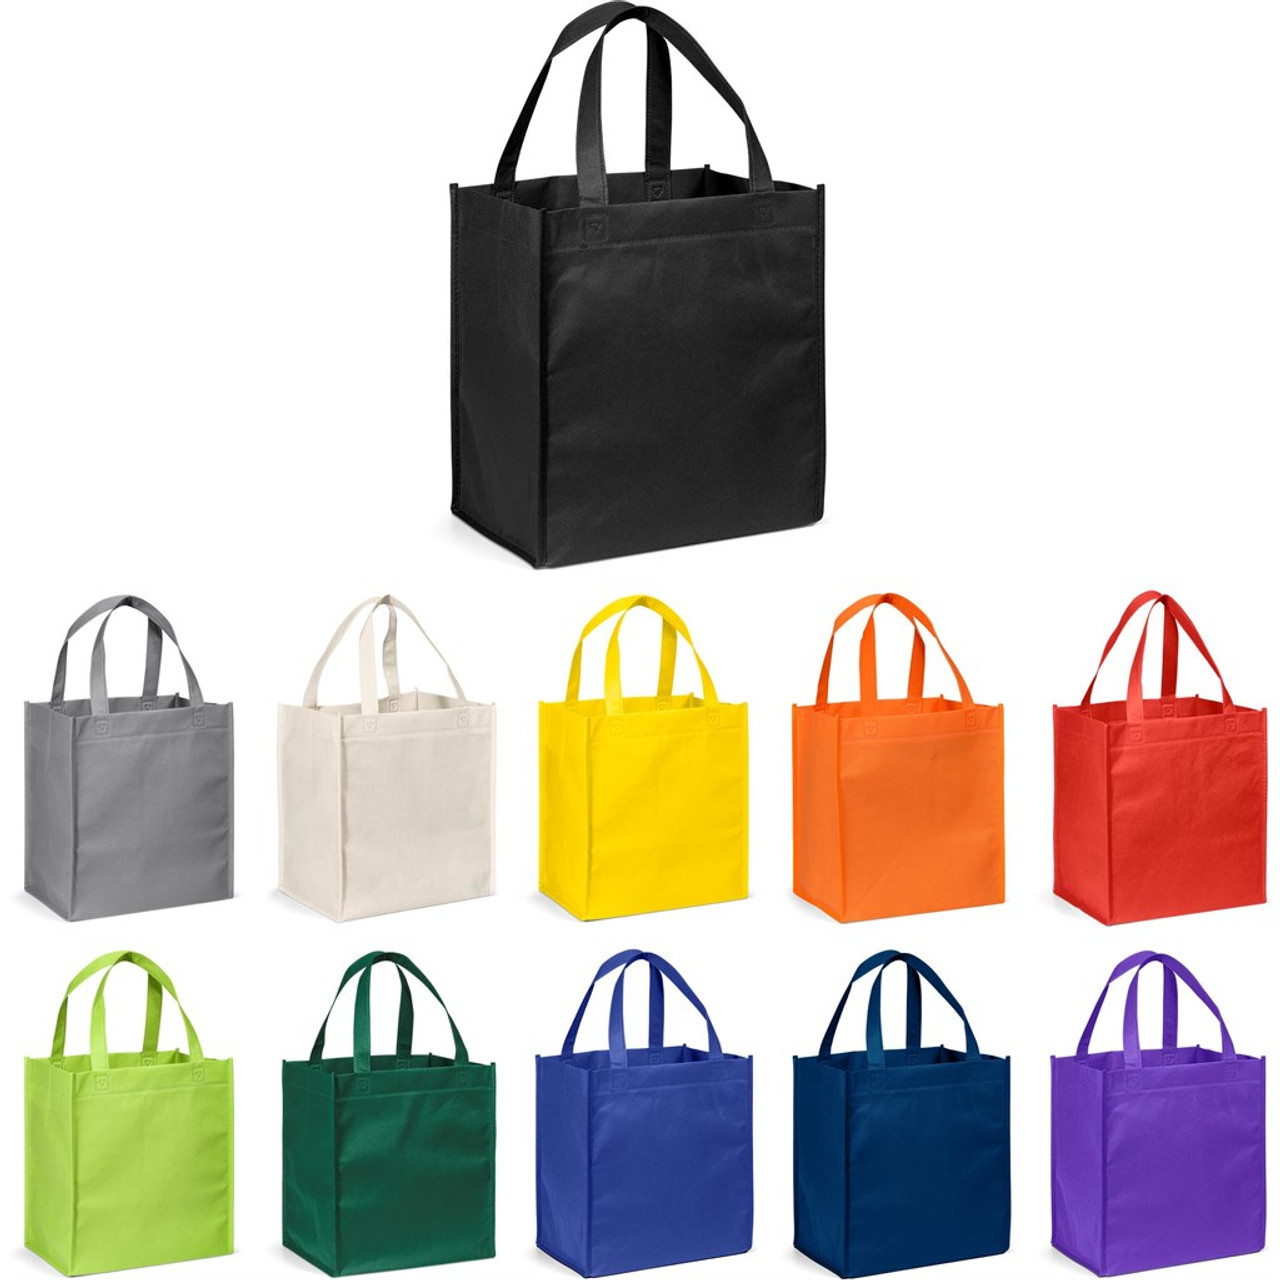 Grocery Shopping Carrier Bags - Environmentally Friendly